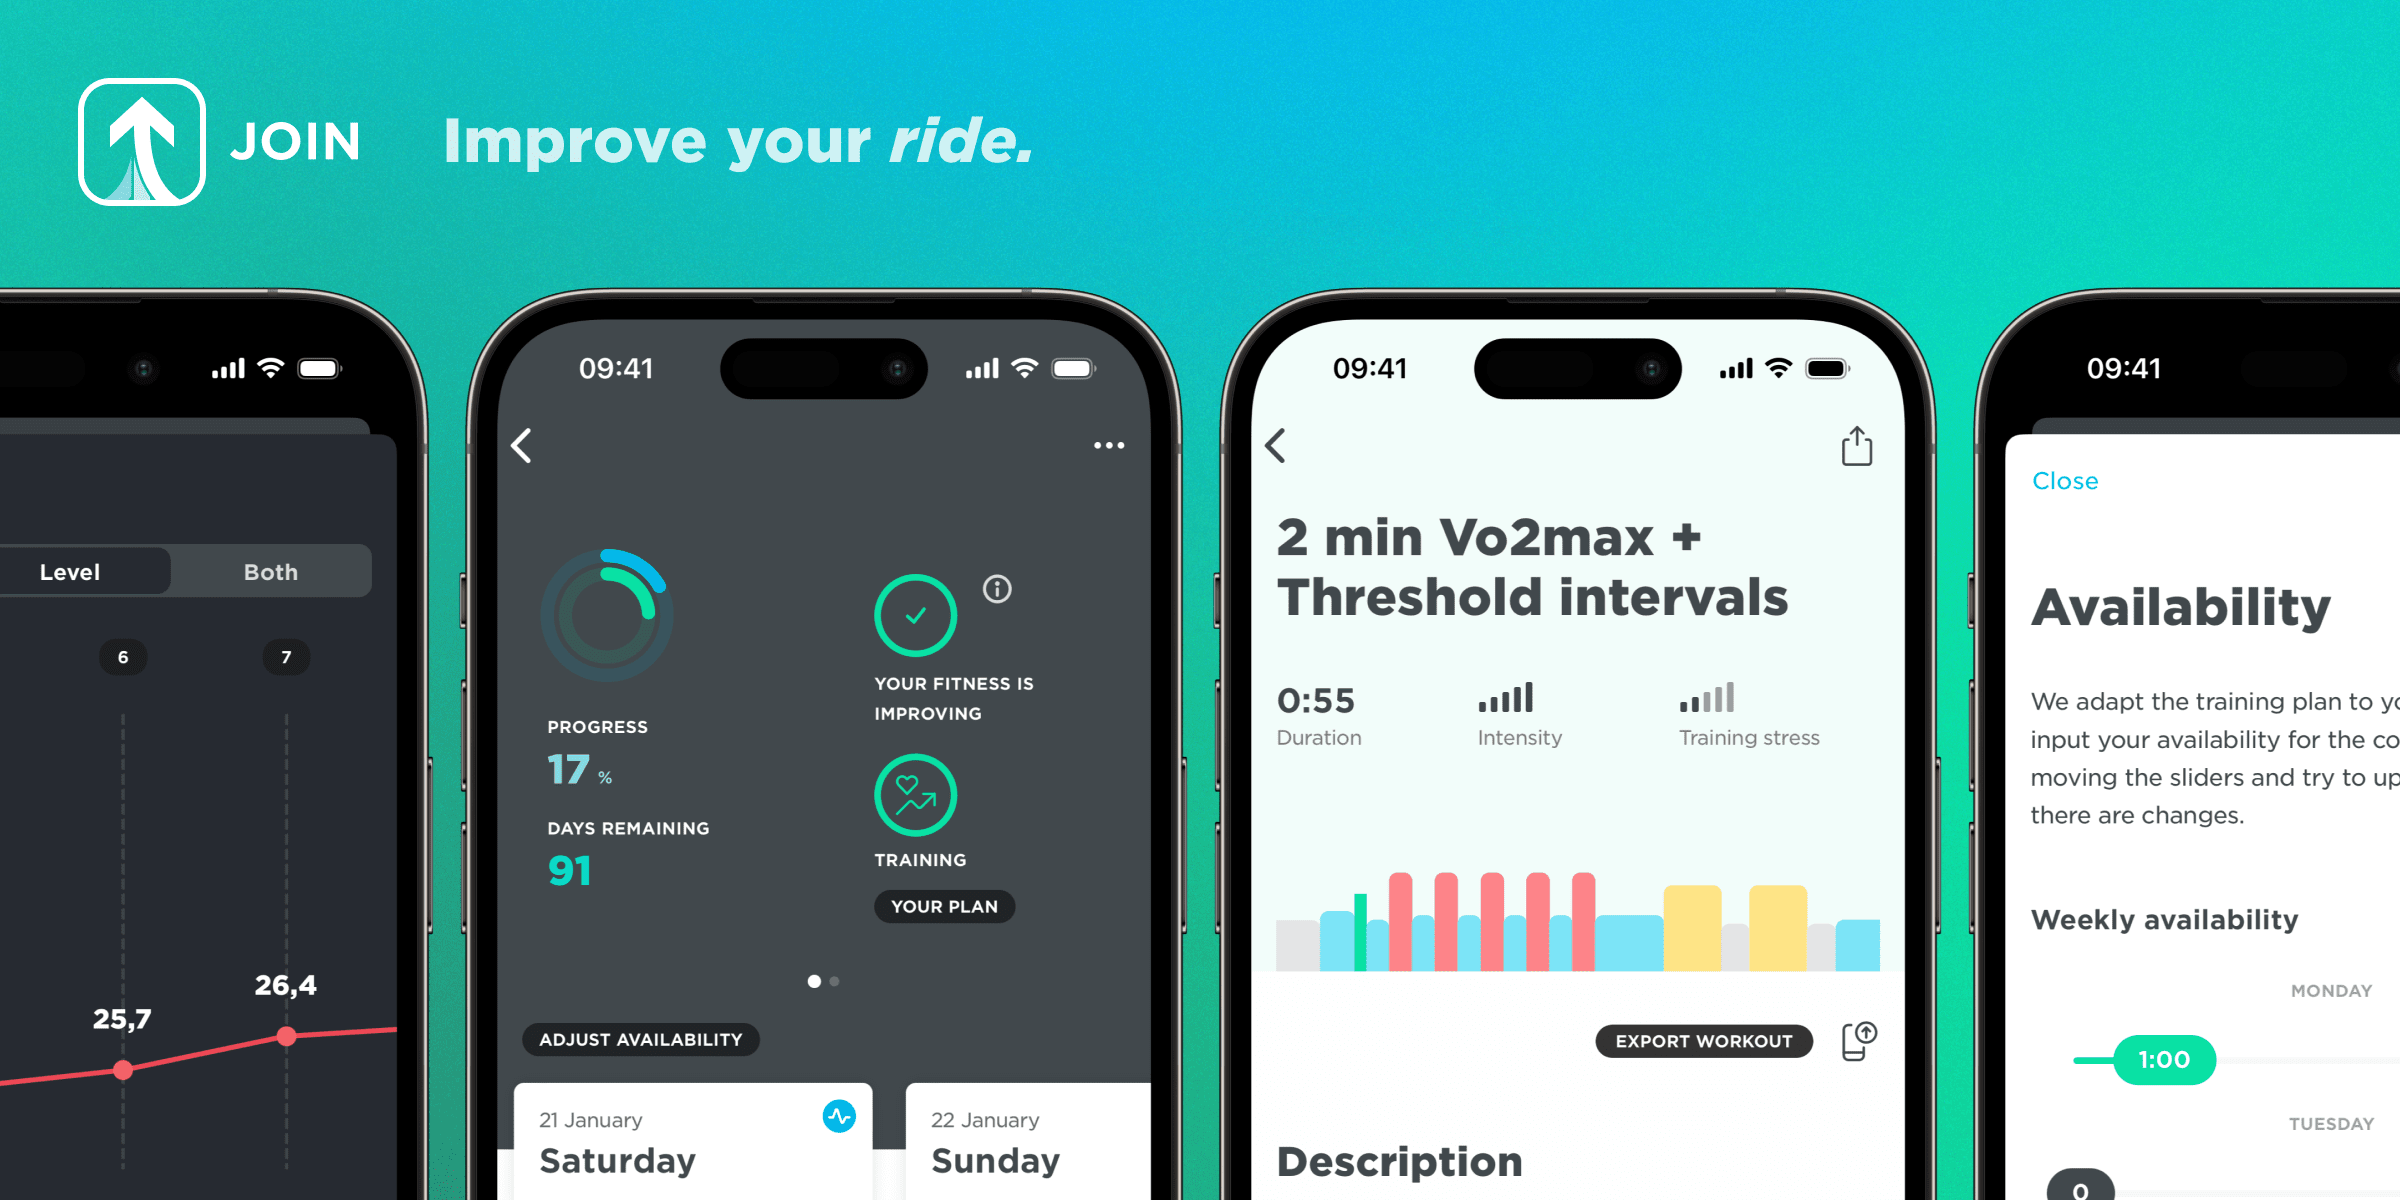 JOIN Cycling app